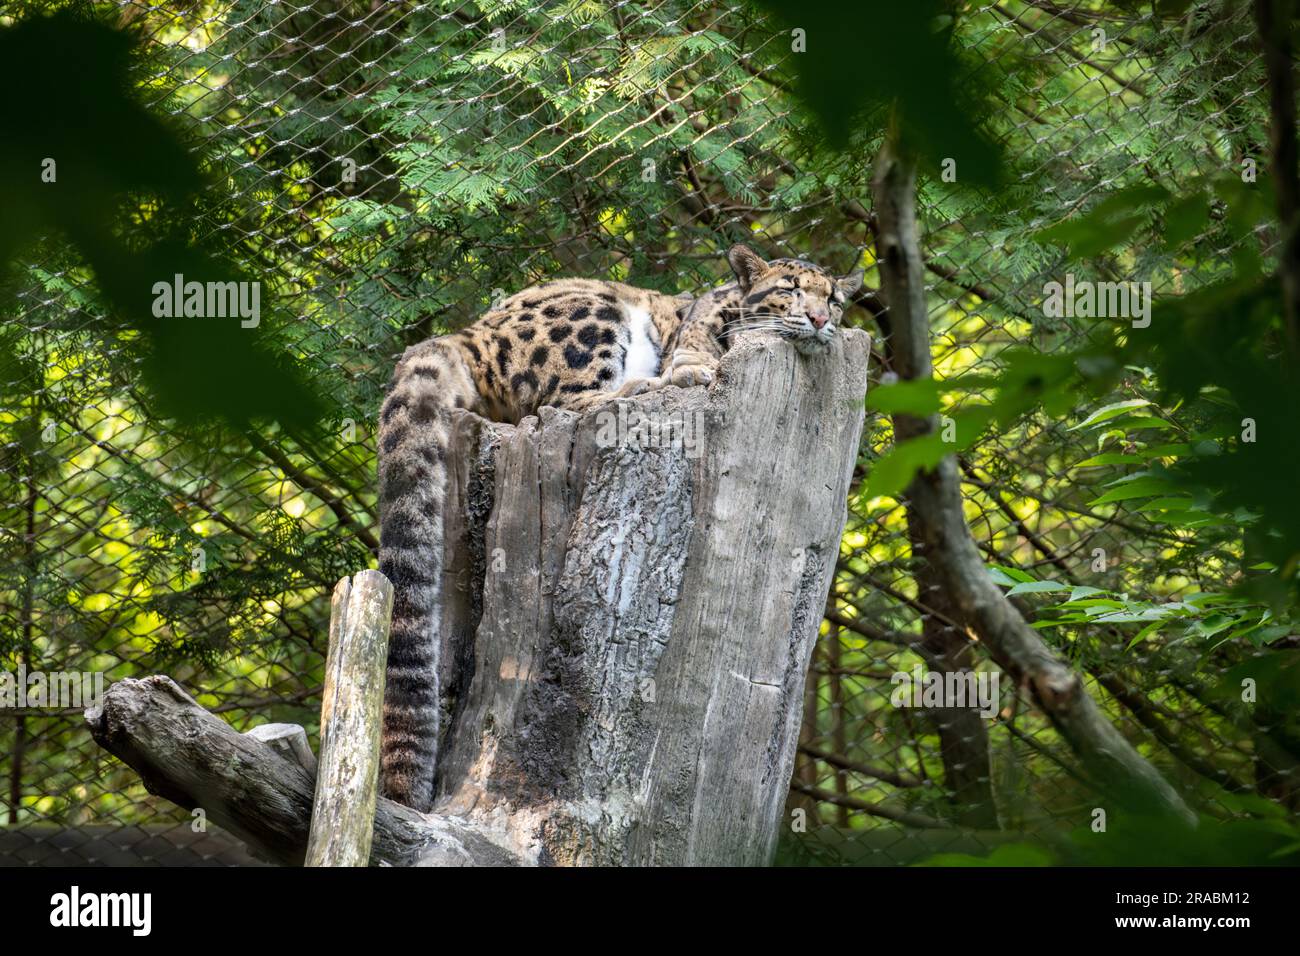 A Sleeping Clouded Leopard in Captivity Stock Photo